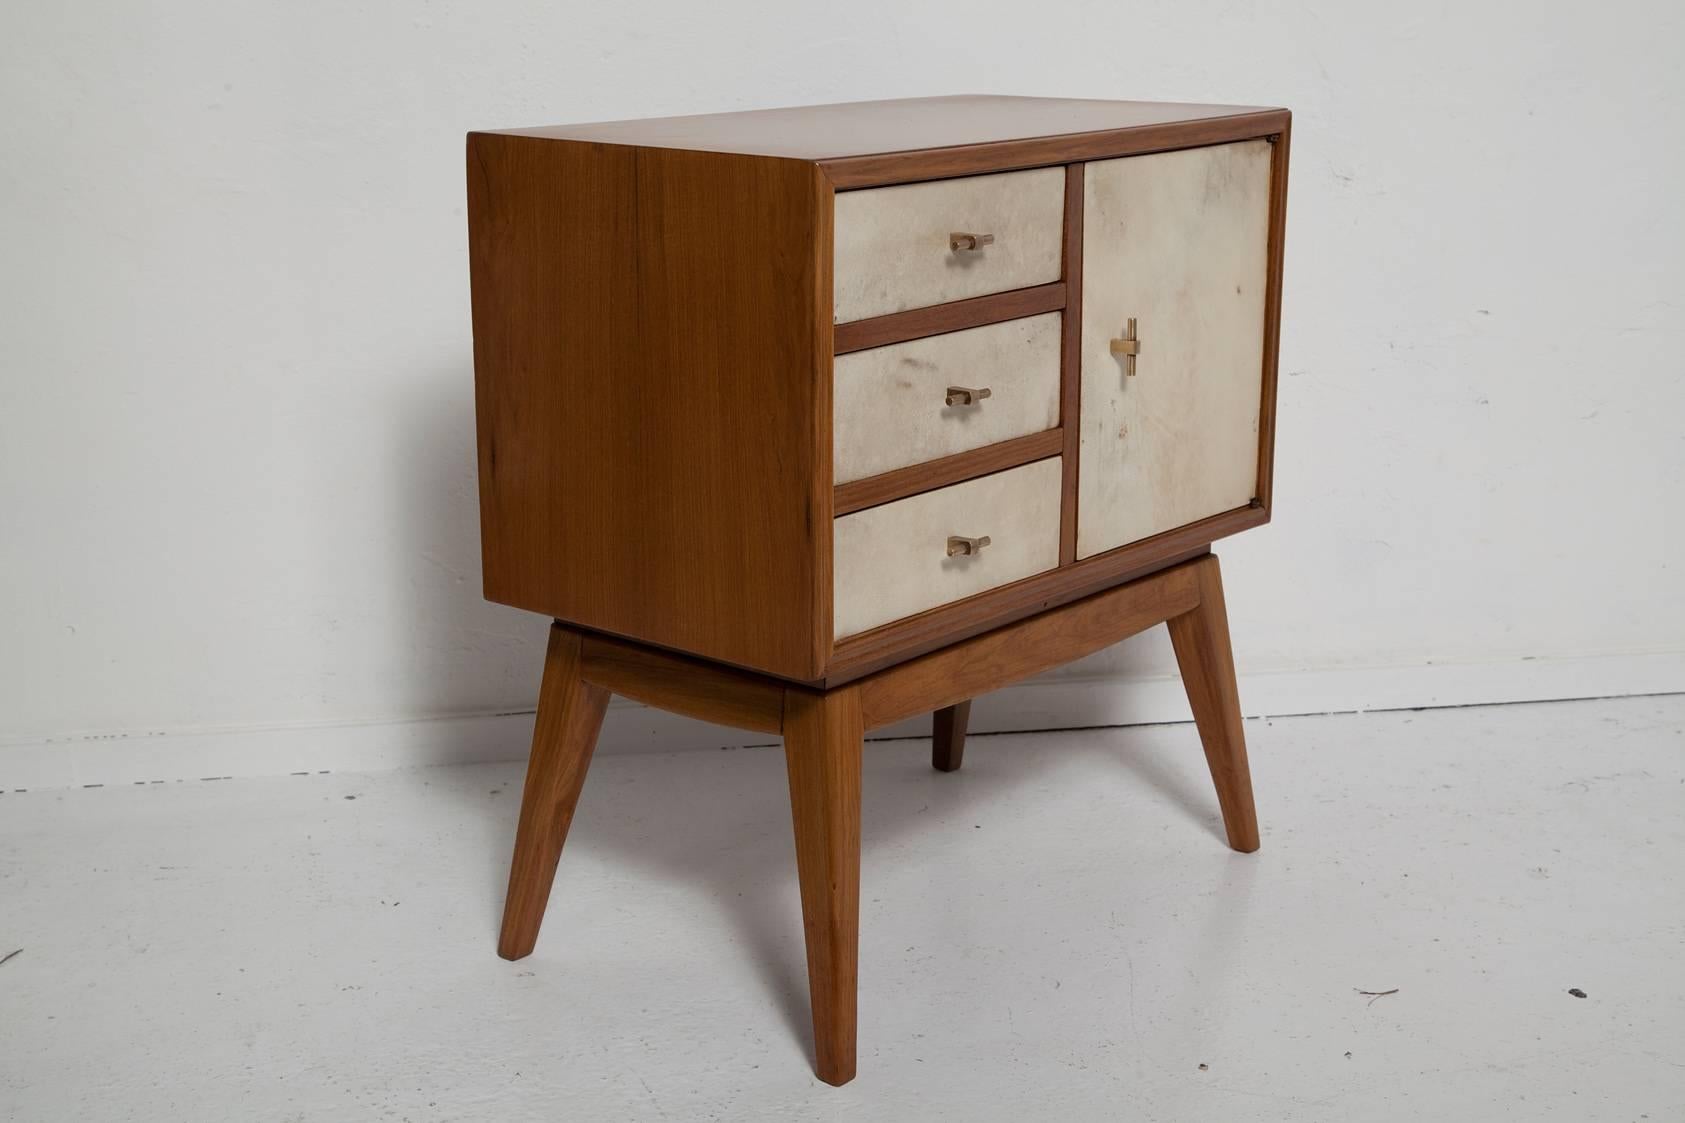 Charming, professionally restored and re-finished 1950s French night stands with teak wood frames, goatskin facing on drawers and doors, and solid brass T-pulls.